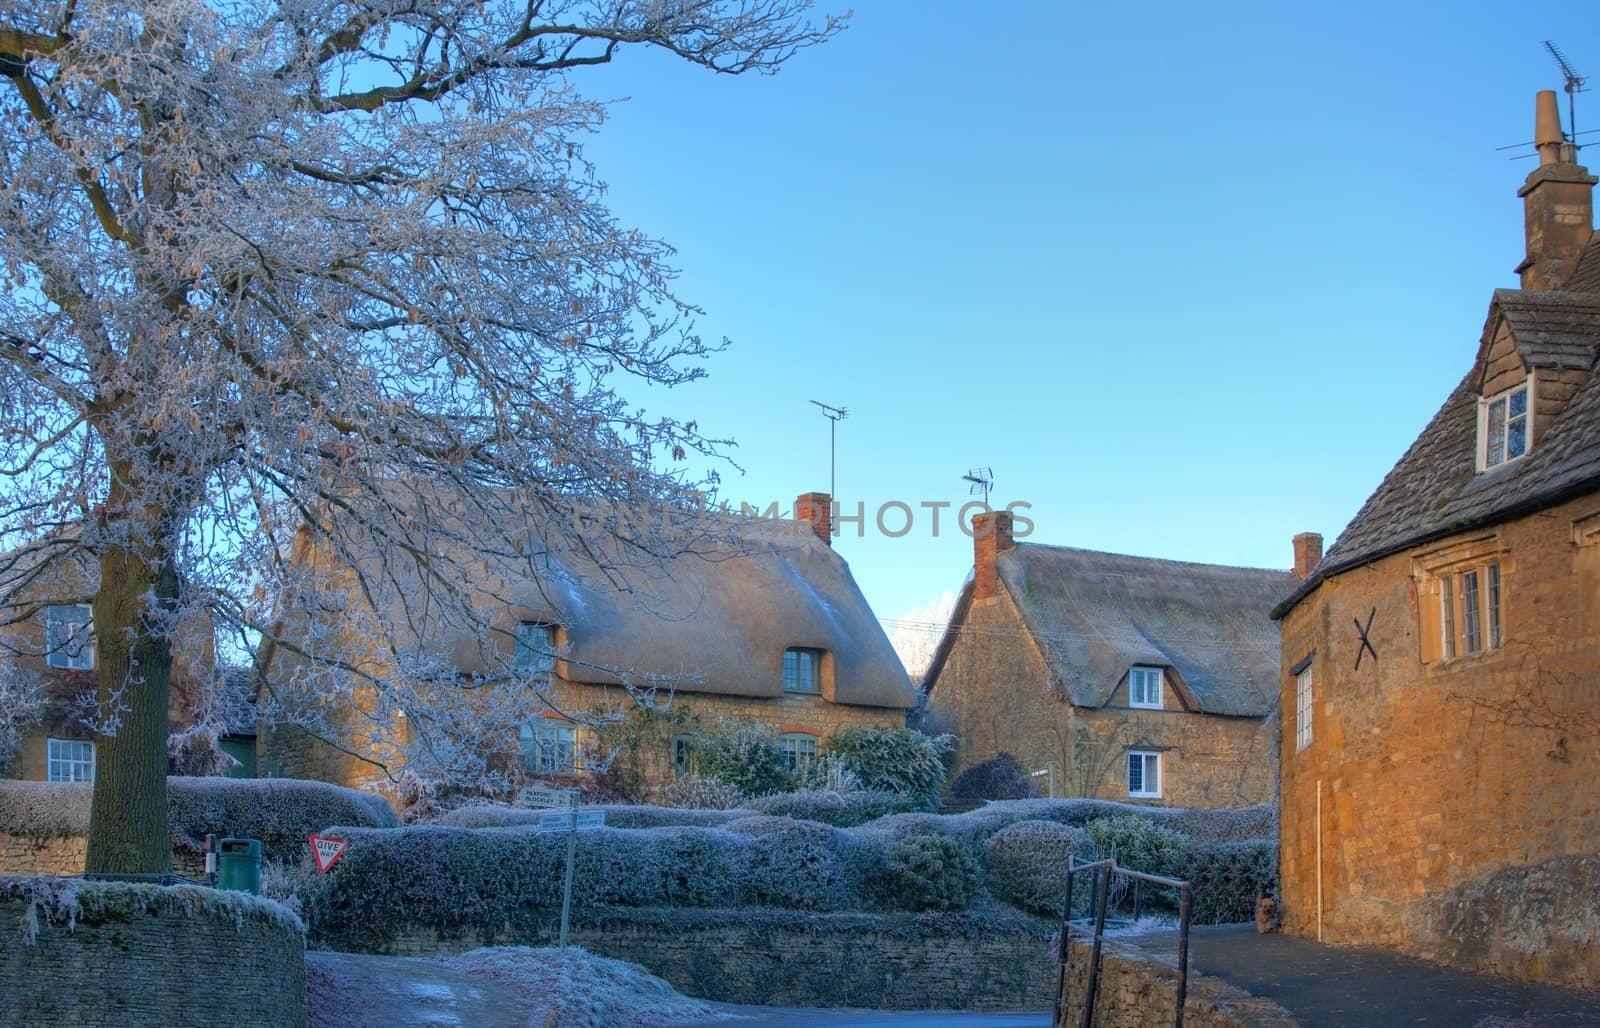 Cotswold village in winter by andrewroland